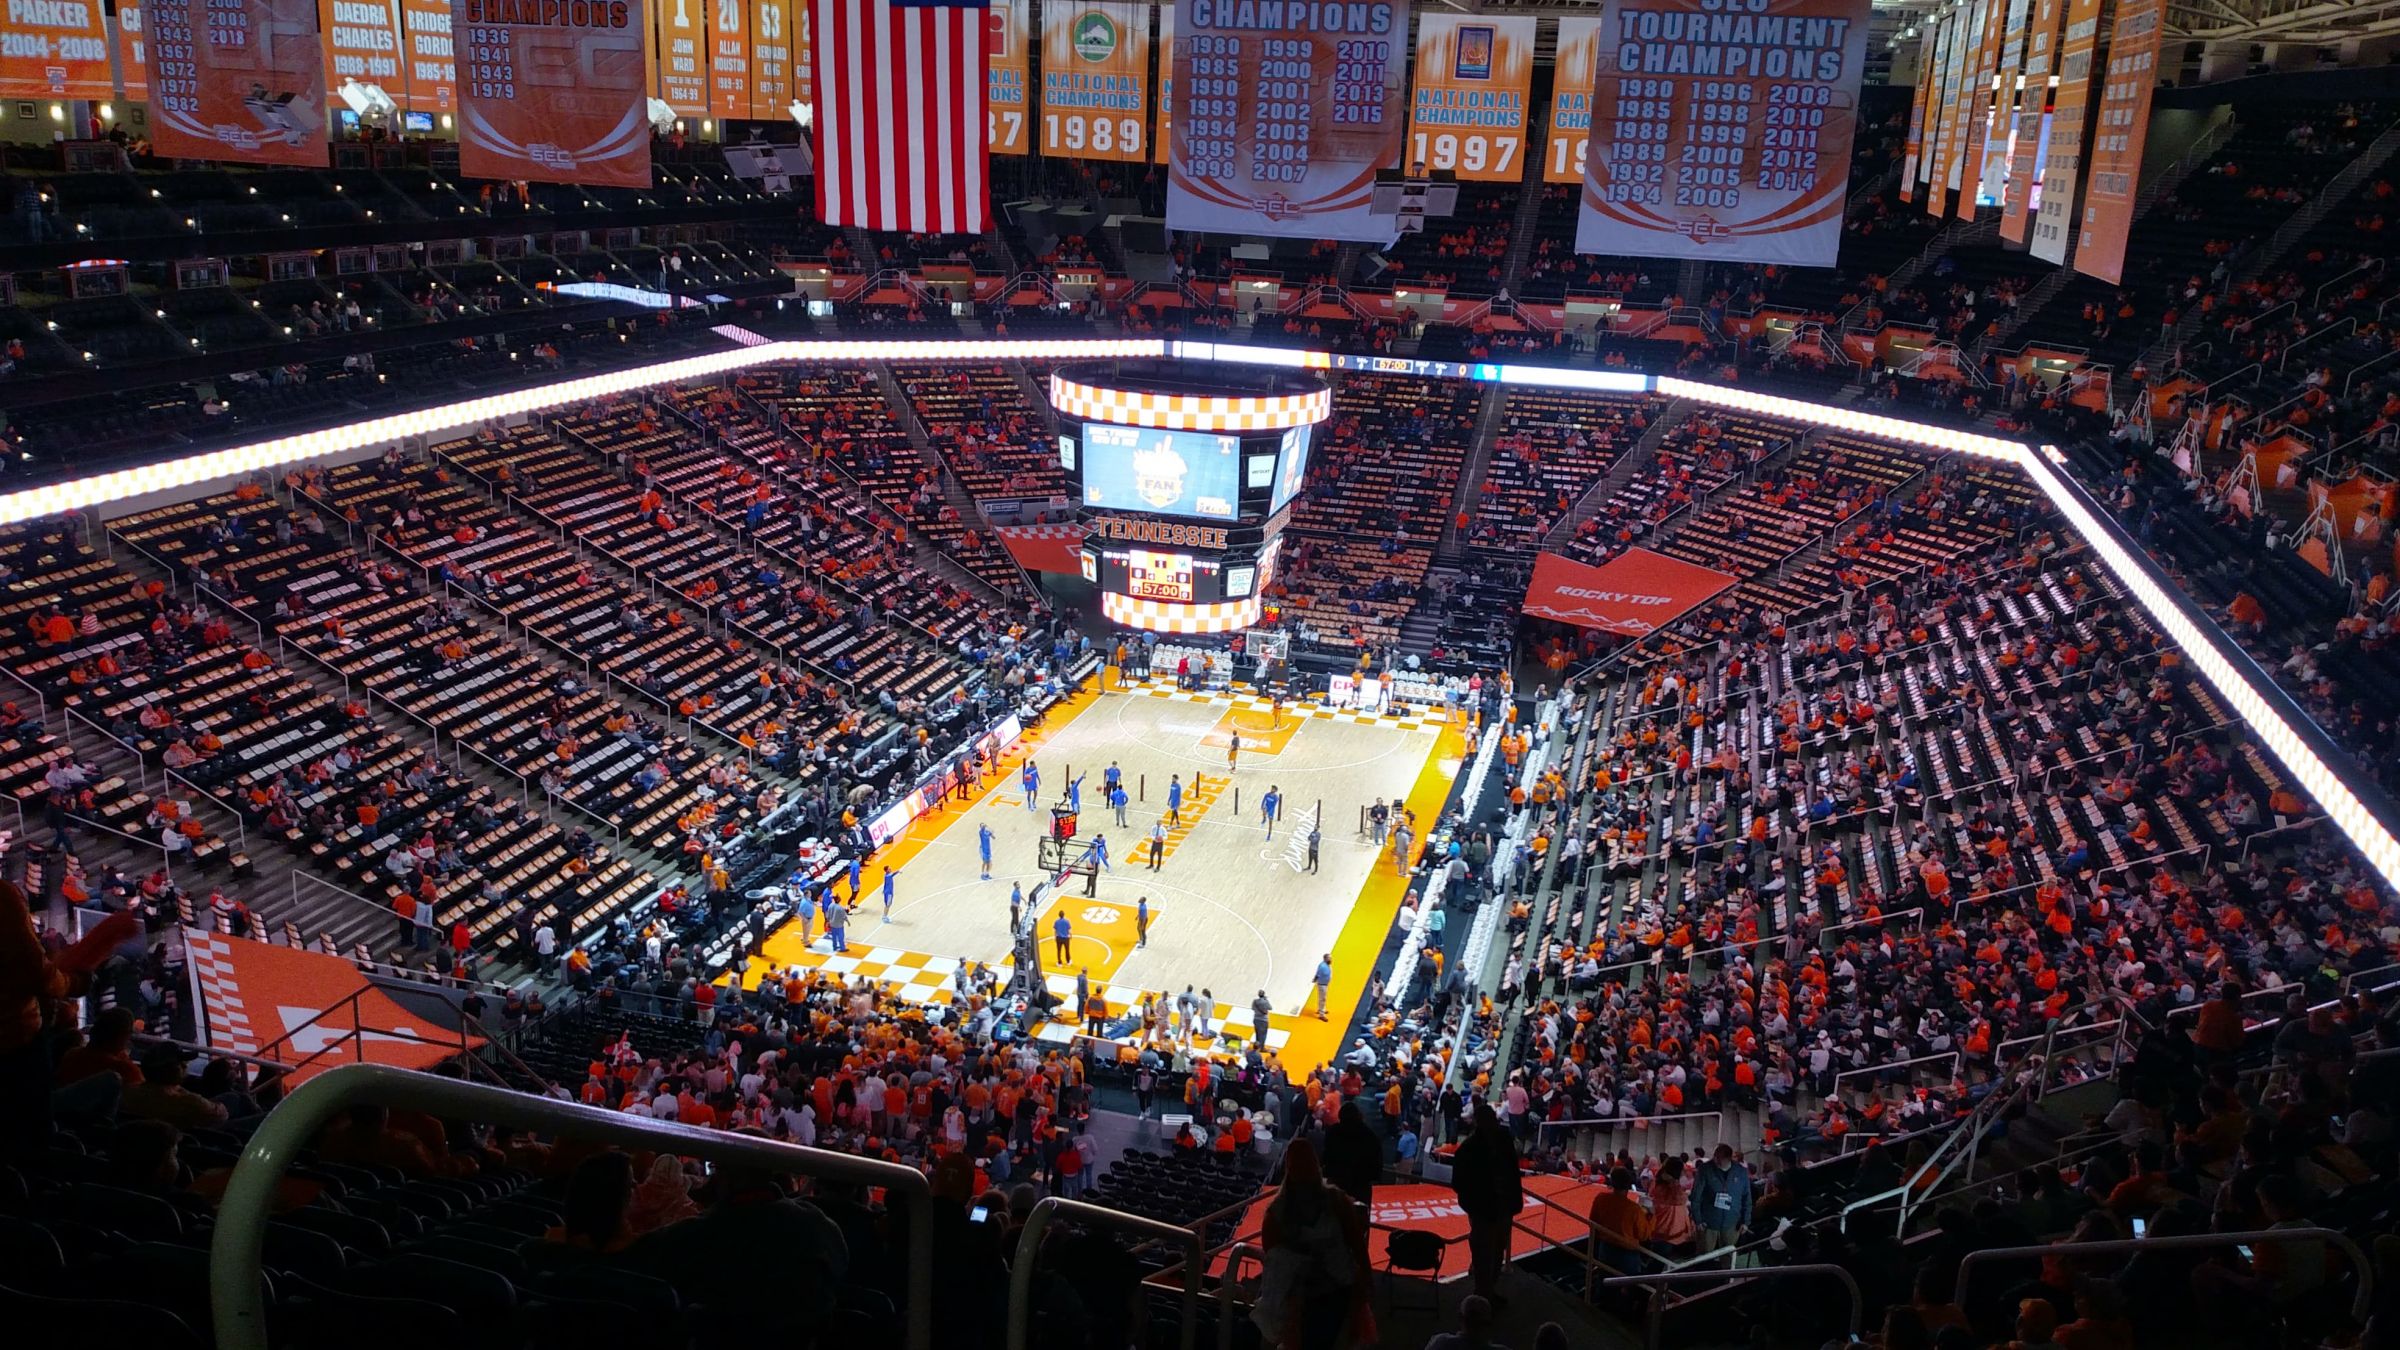 section 327a, row 18 seat view  - thompson-boling arena